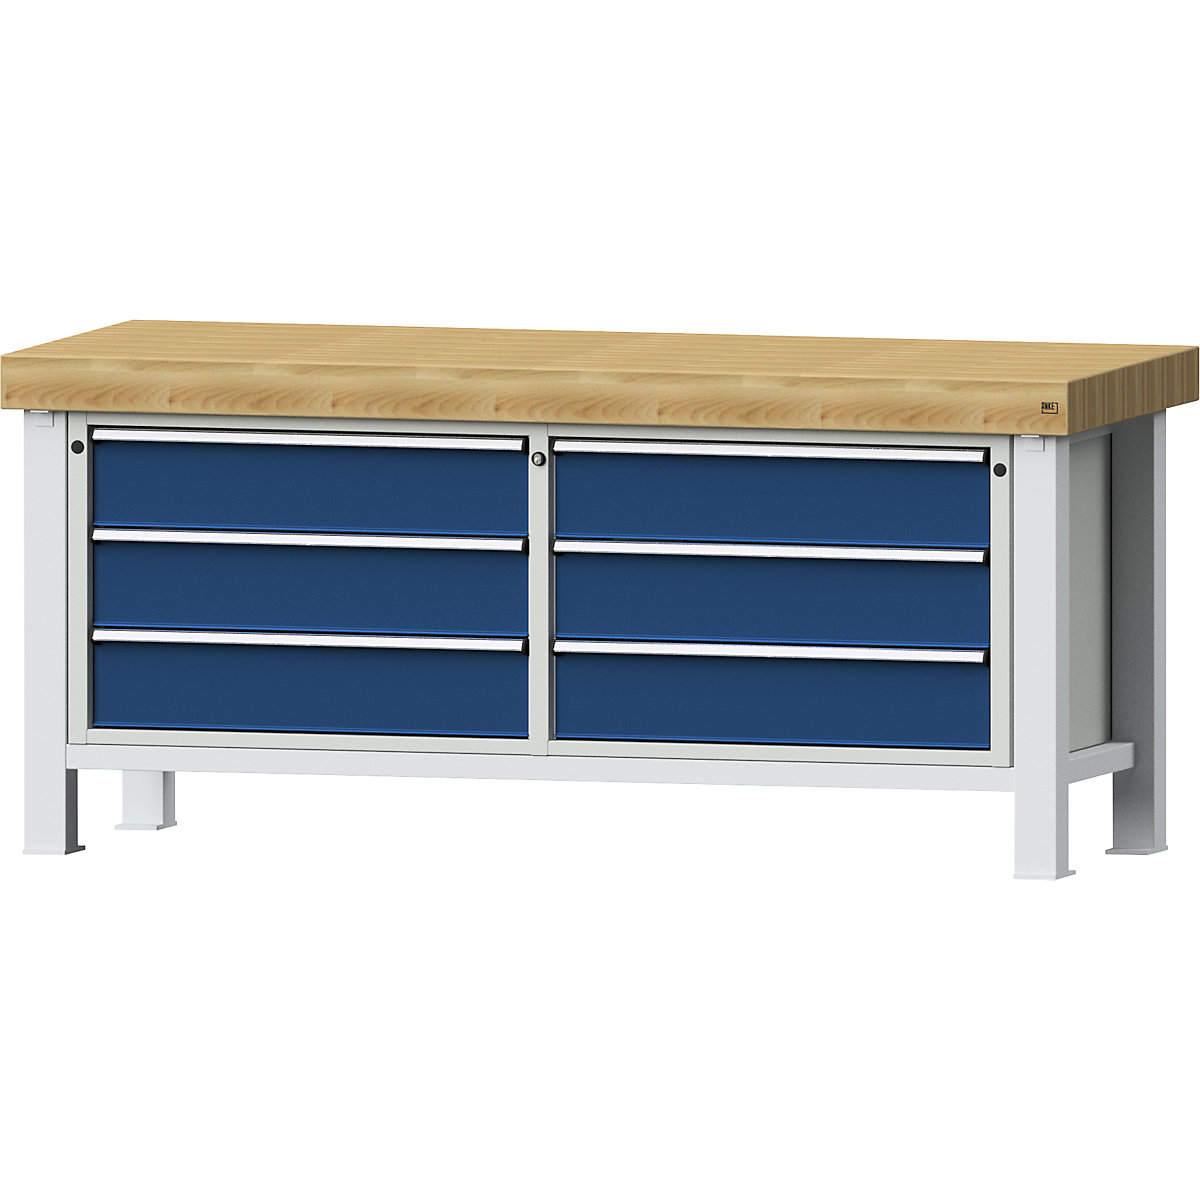 Heavy duty workbench – ANKE, 3 drawers on left, 3 drawers on right, solid beech worktop 100 mm-2